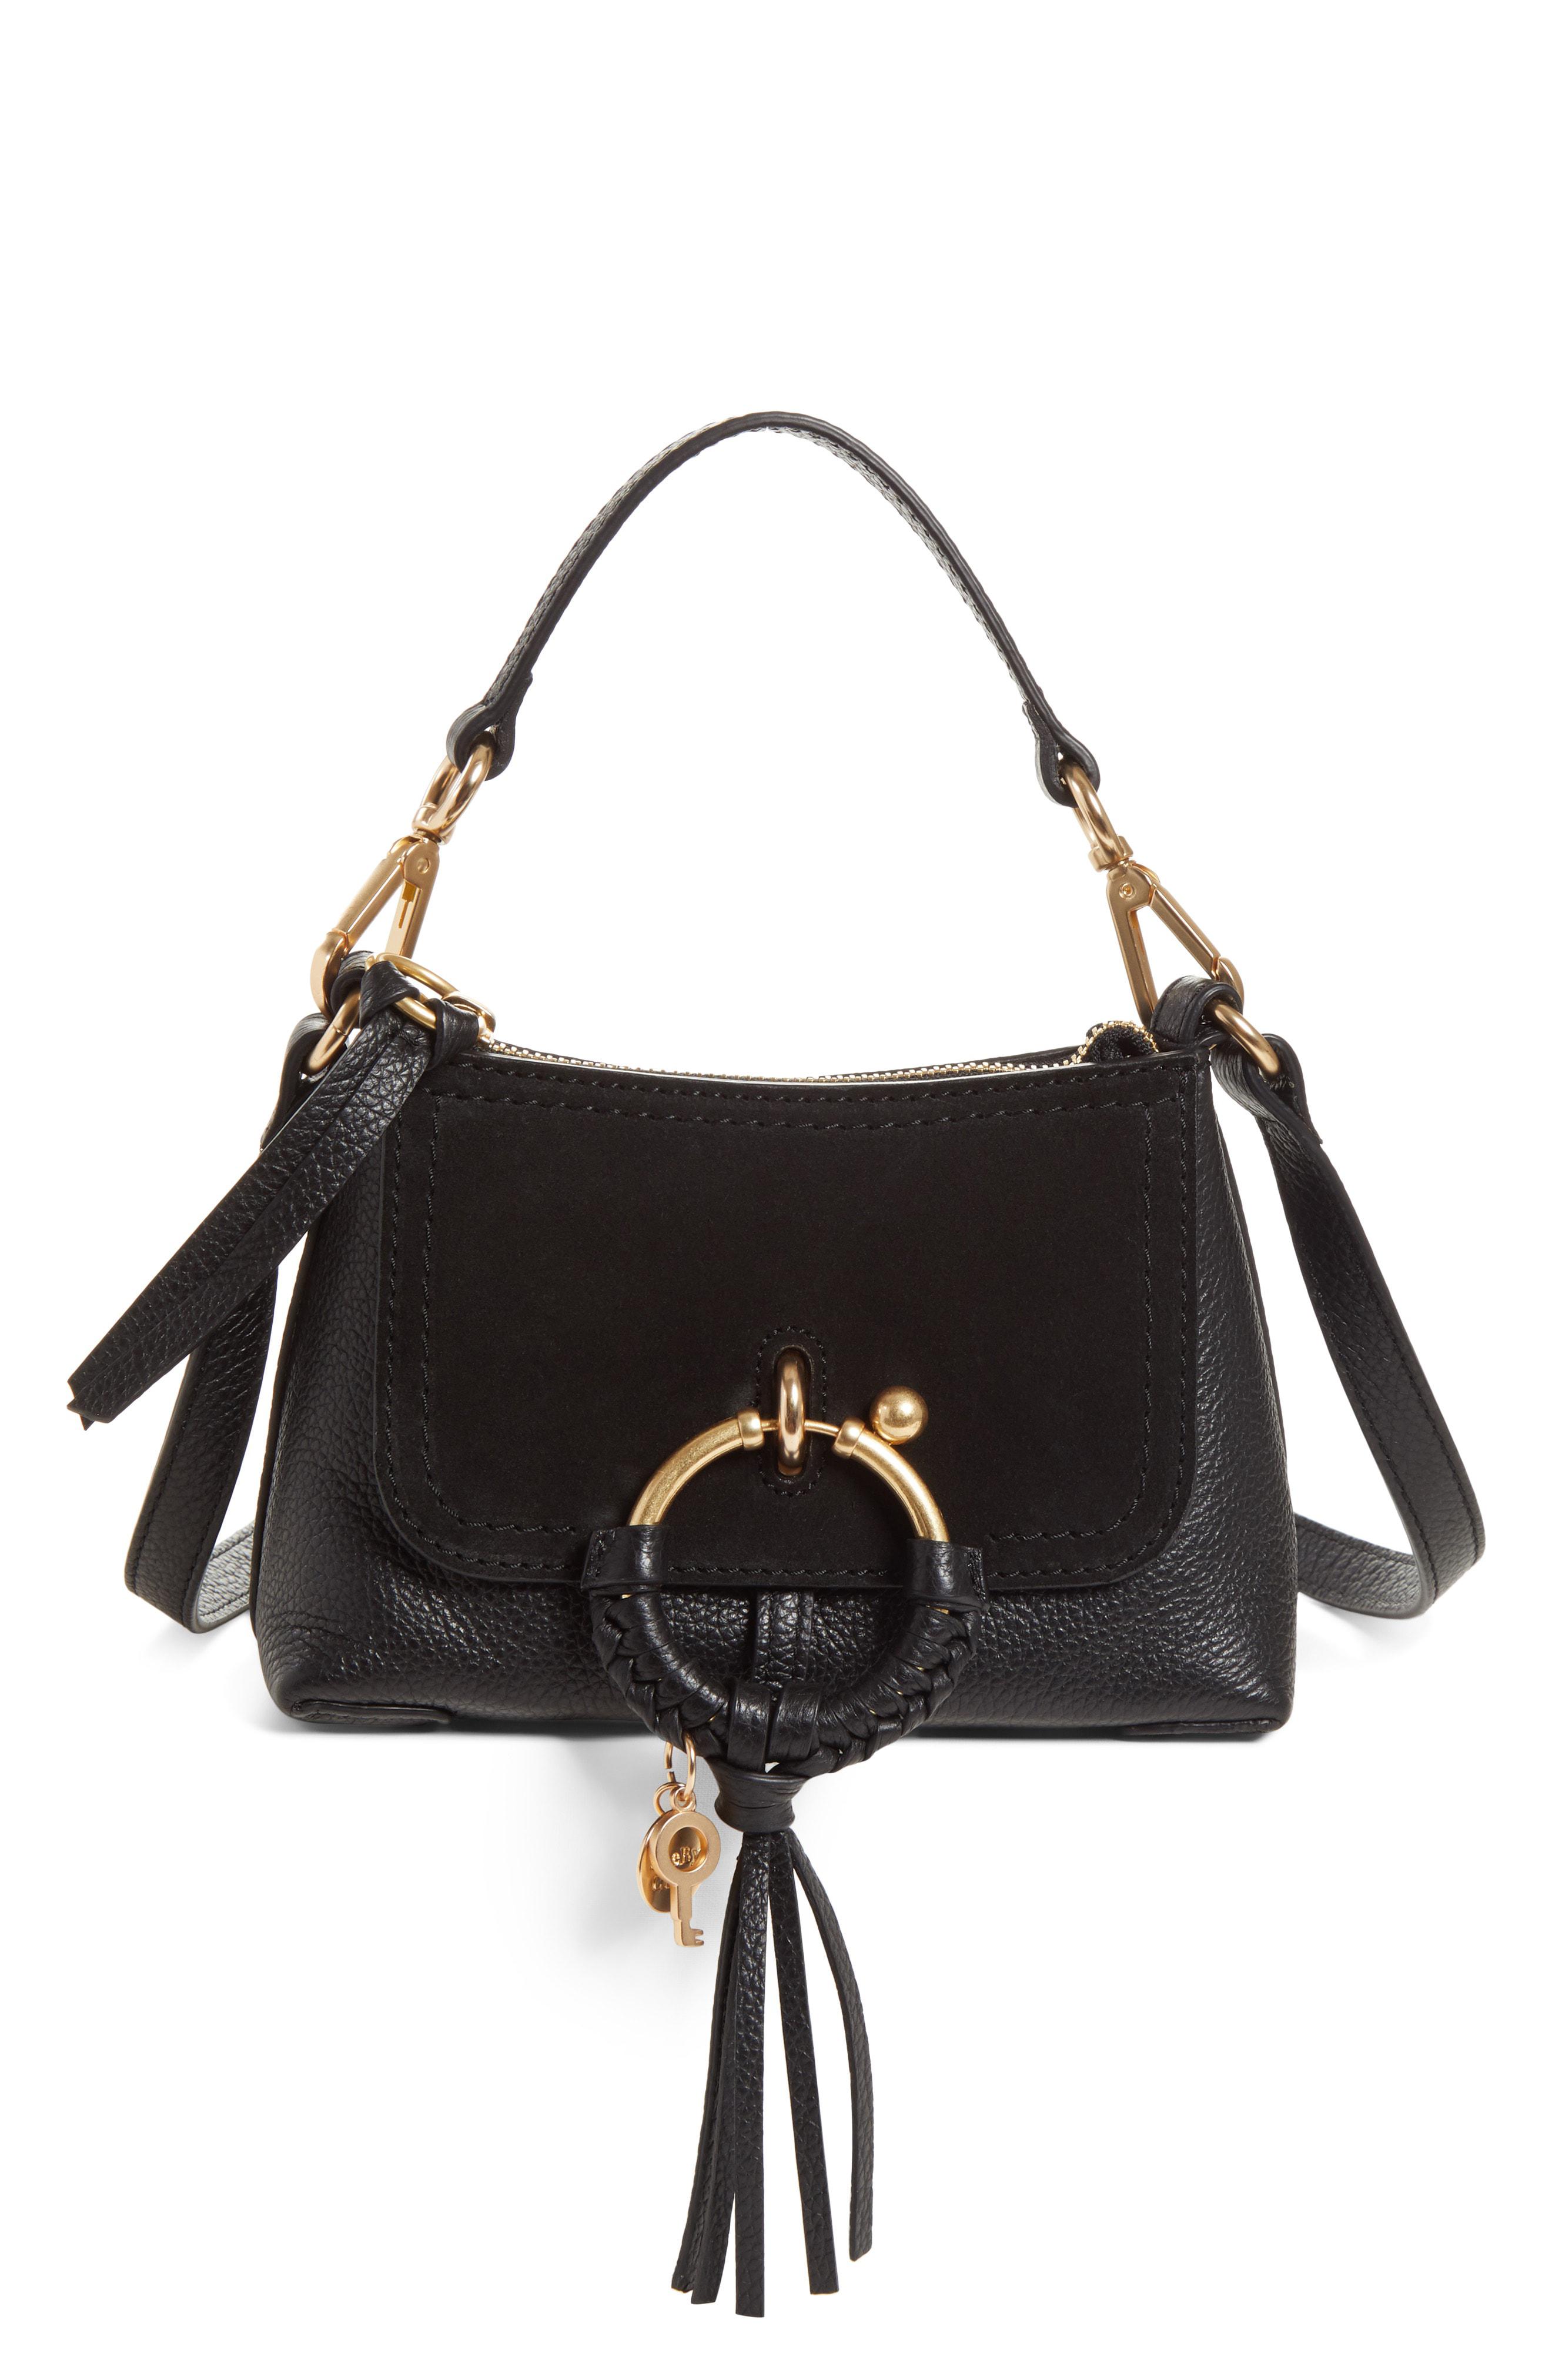 Lyst - See By Chloé Small Joan Suede & Leather Crossbody Bag in Black